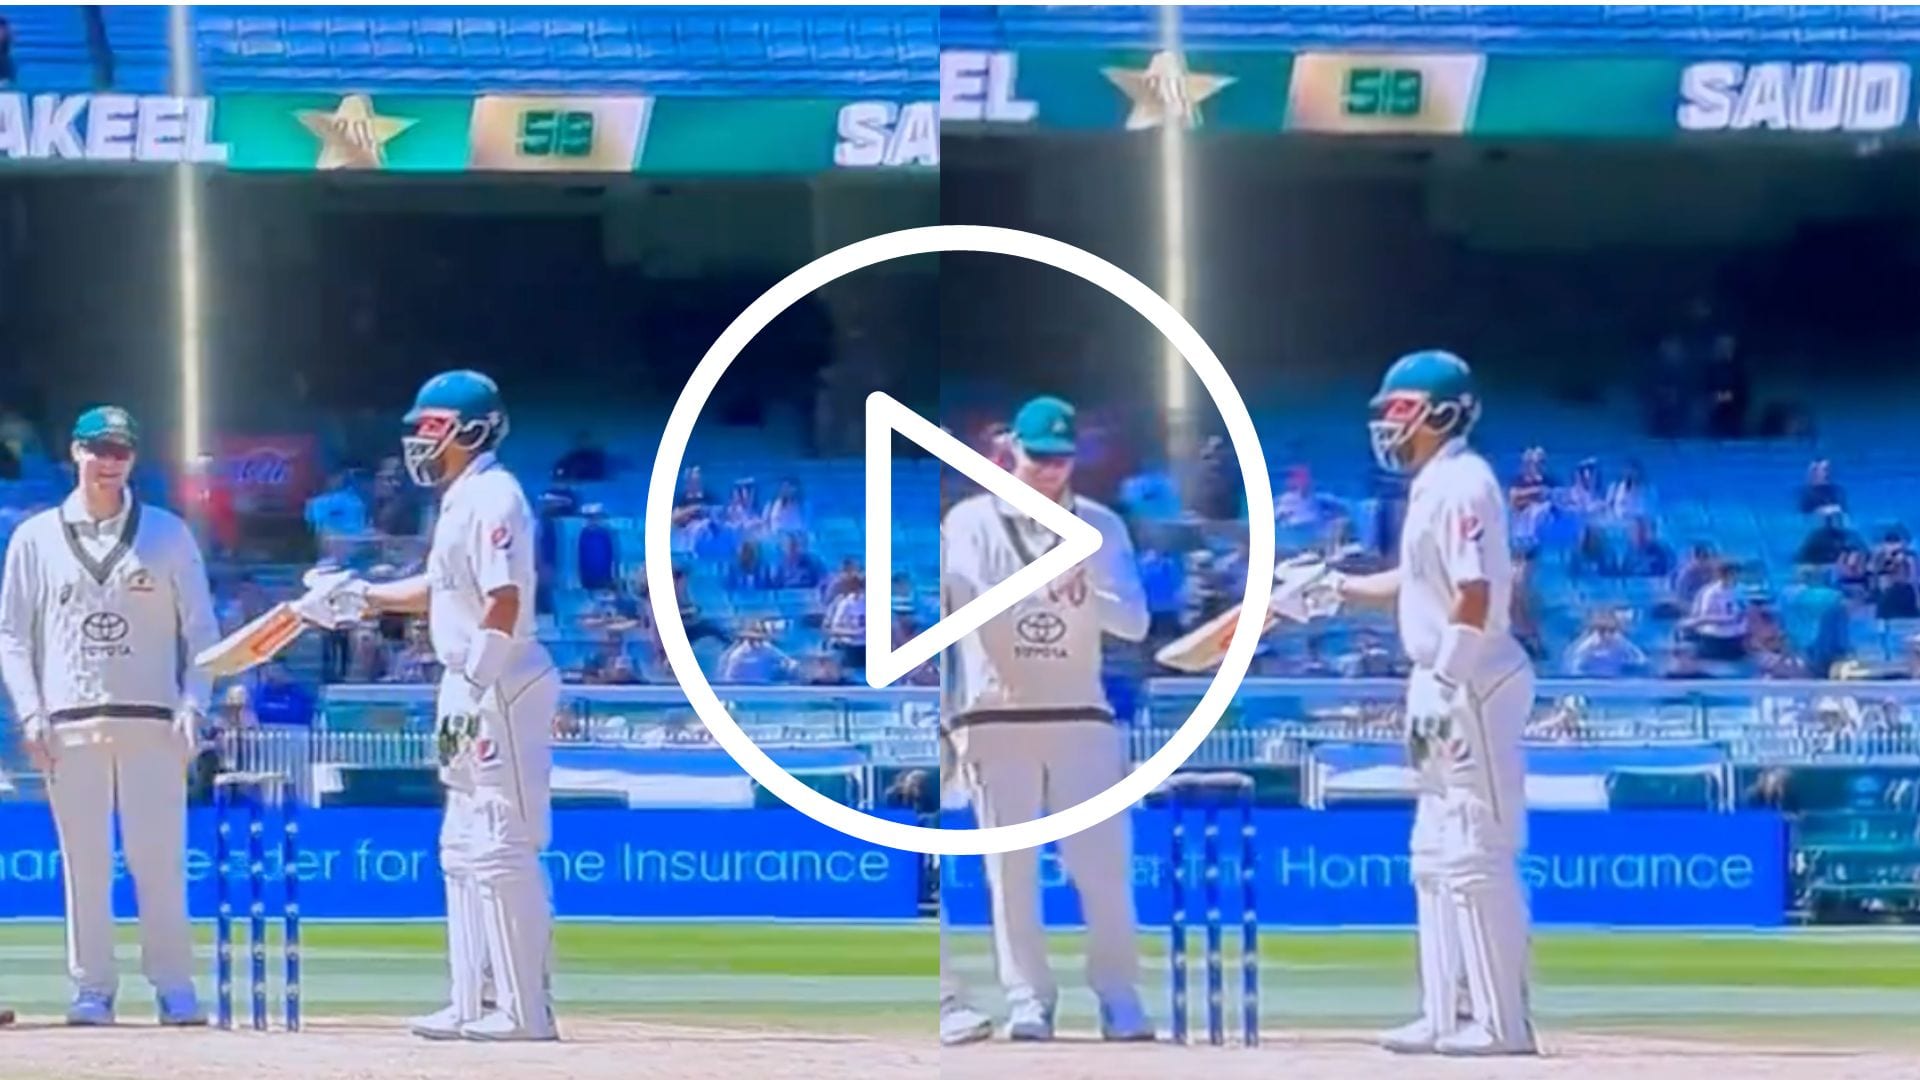 [Watch] Babar Azam ‘Gives His Bat’ To Steve Smith; Aussie Apologies With ‘Folded Hands’